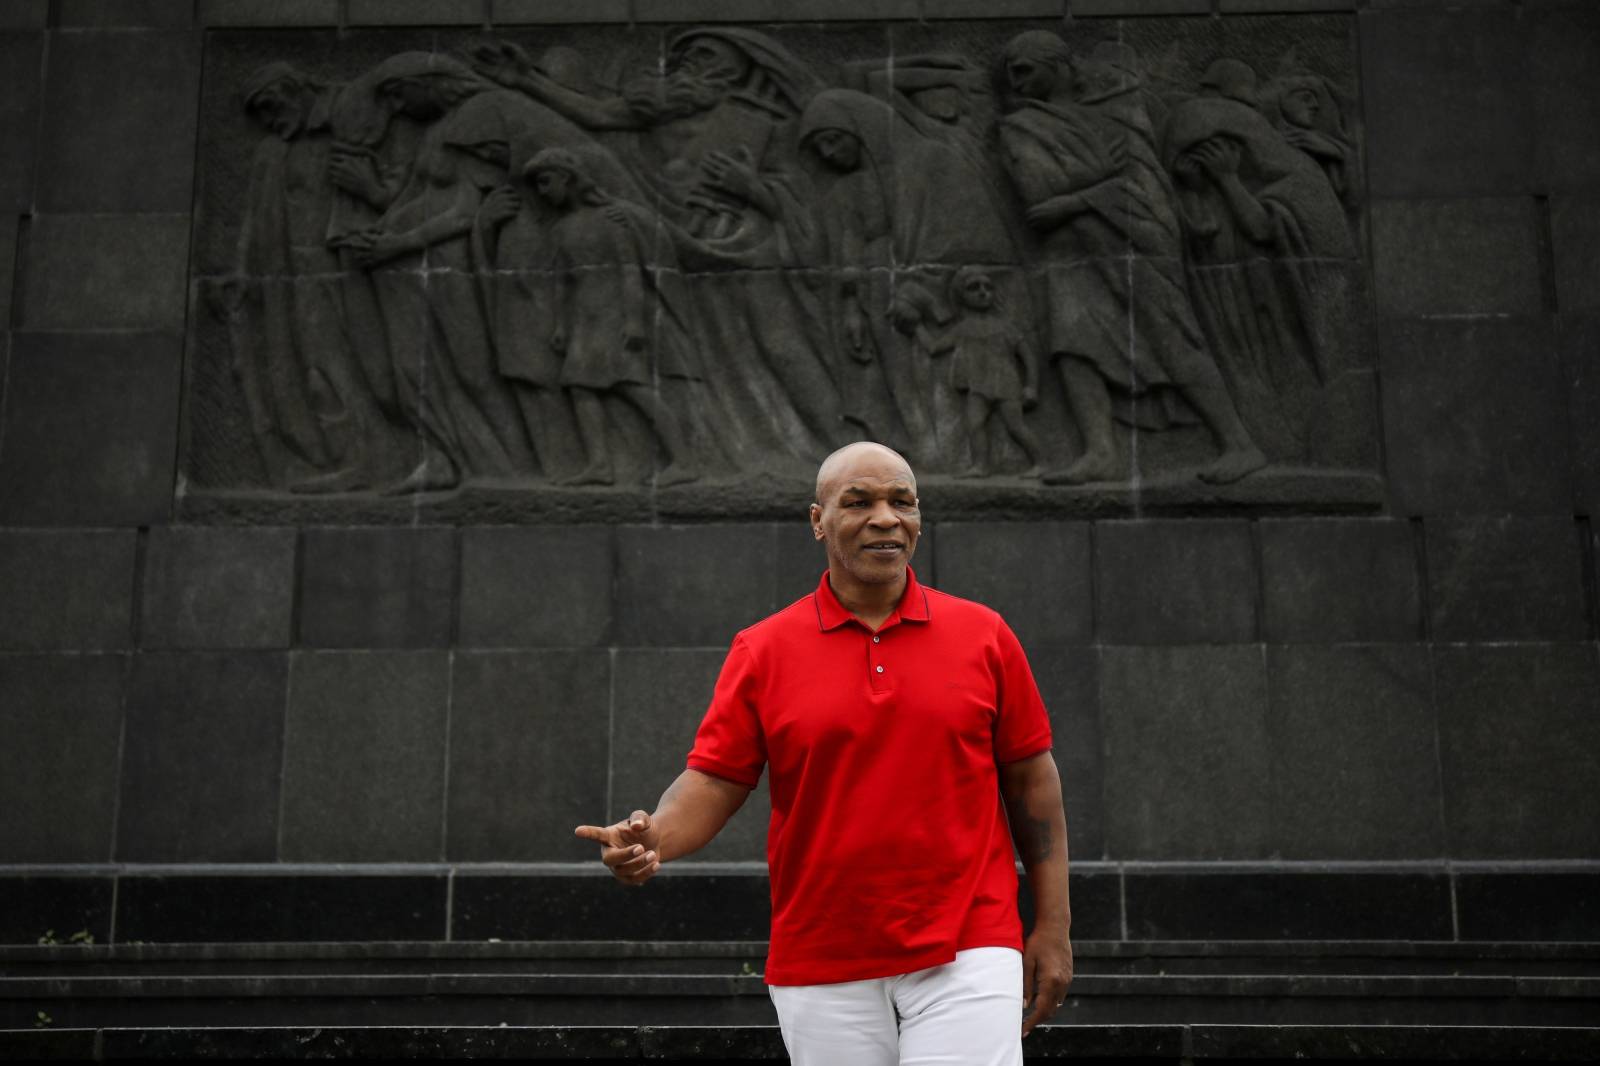 Former boxer Mike Tyson stands in front of the Warsaw's Ghetto Heroes Monument at the Museum of the History of Polish Jews in Warsaw